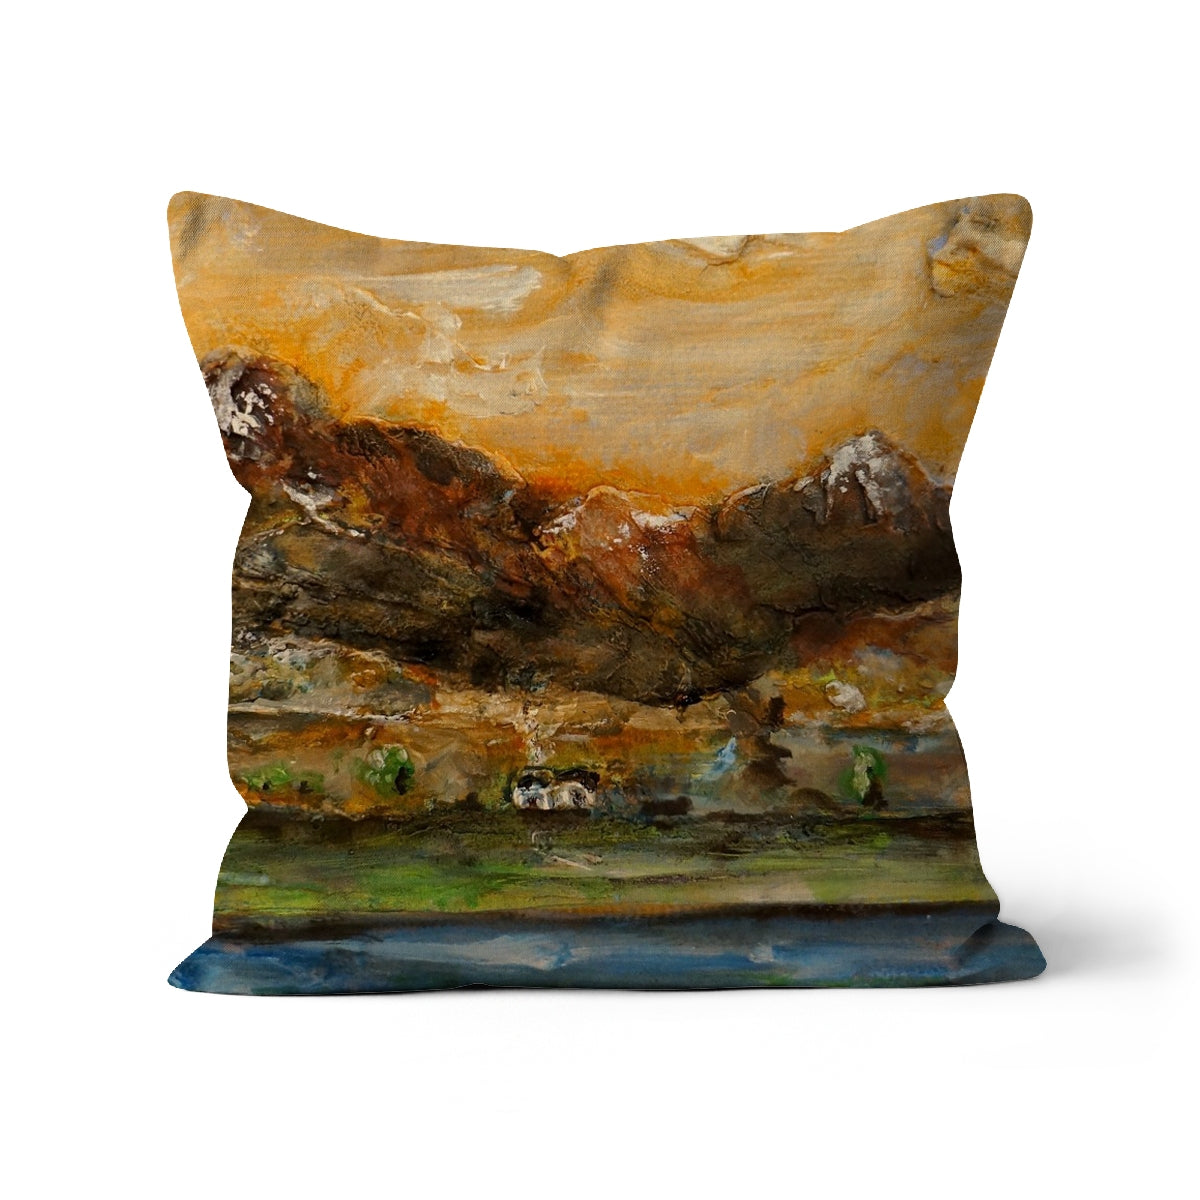 A Glencoe Cottage Art Gifts Cushion-Cushions-Glencoe Art Gallery-Canvas-22"x22"-Paintings, Prints, Homeware, Art Gifts From Scotland By Scottish Artist Kevin Hunter